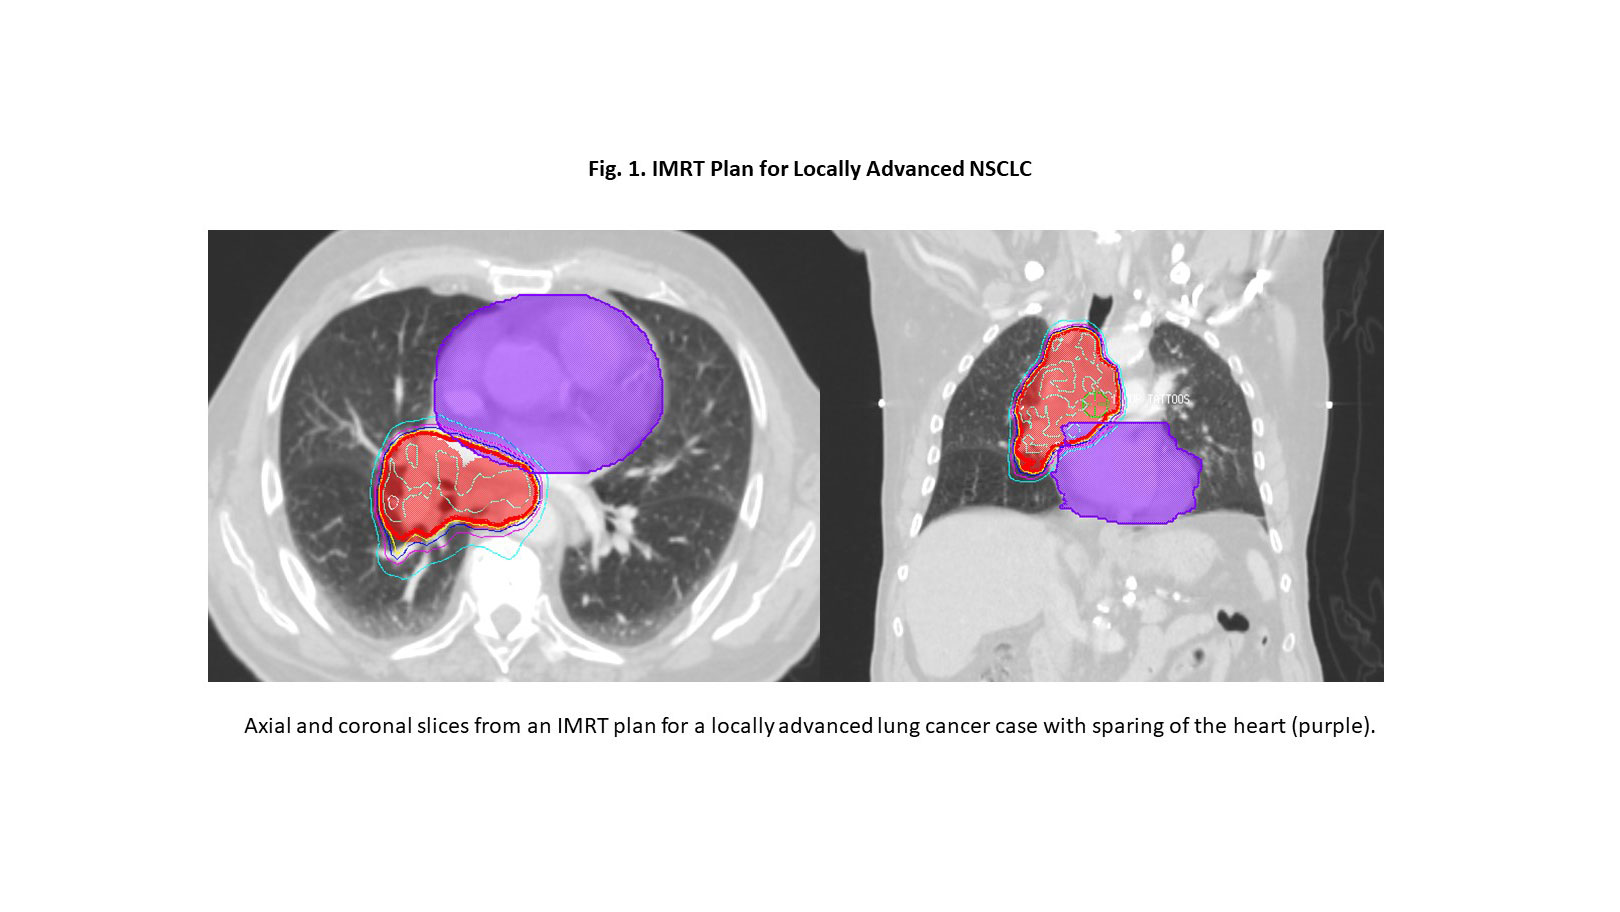 Cardiac Radiation Dose, Cardiac Events, and Survival in Locally Advanced NSCLC